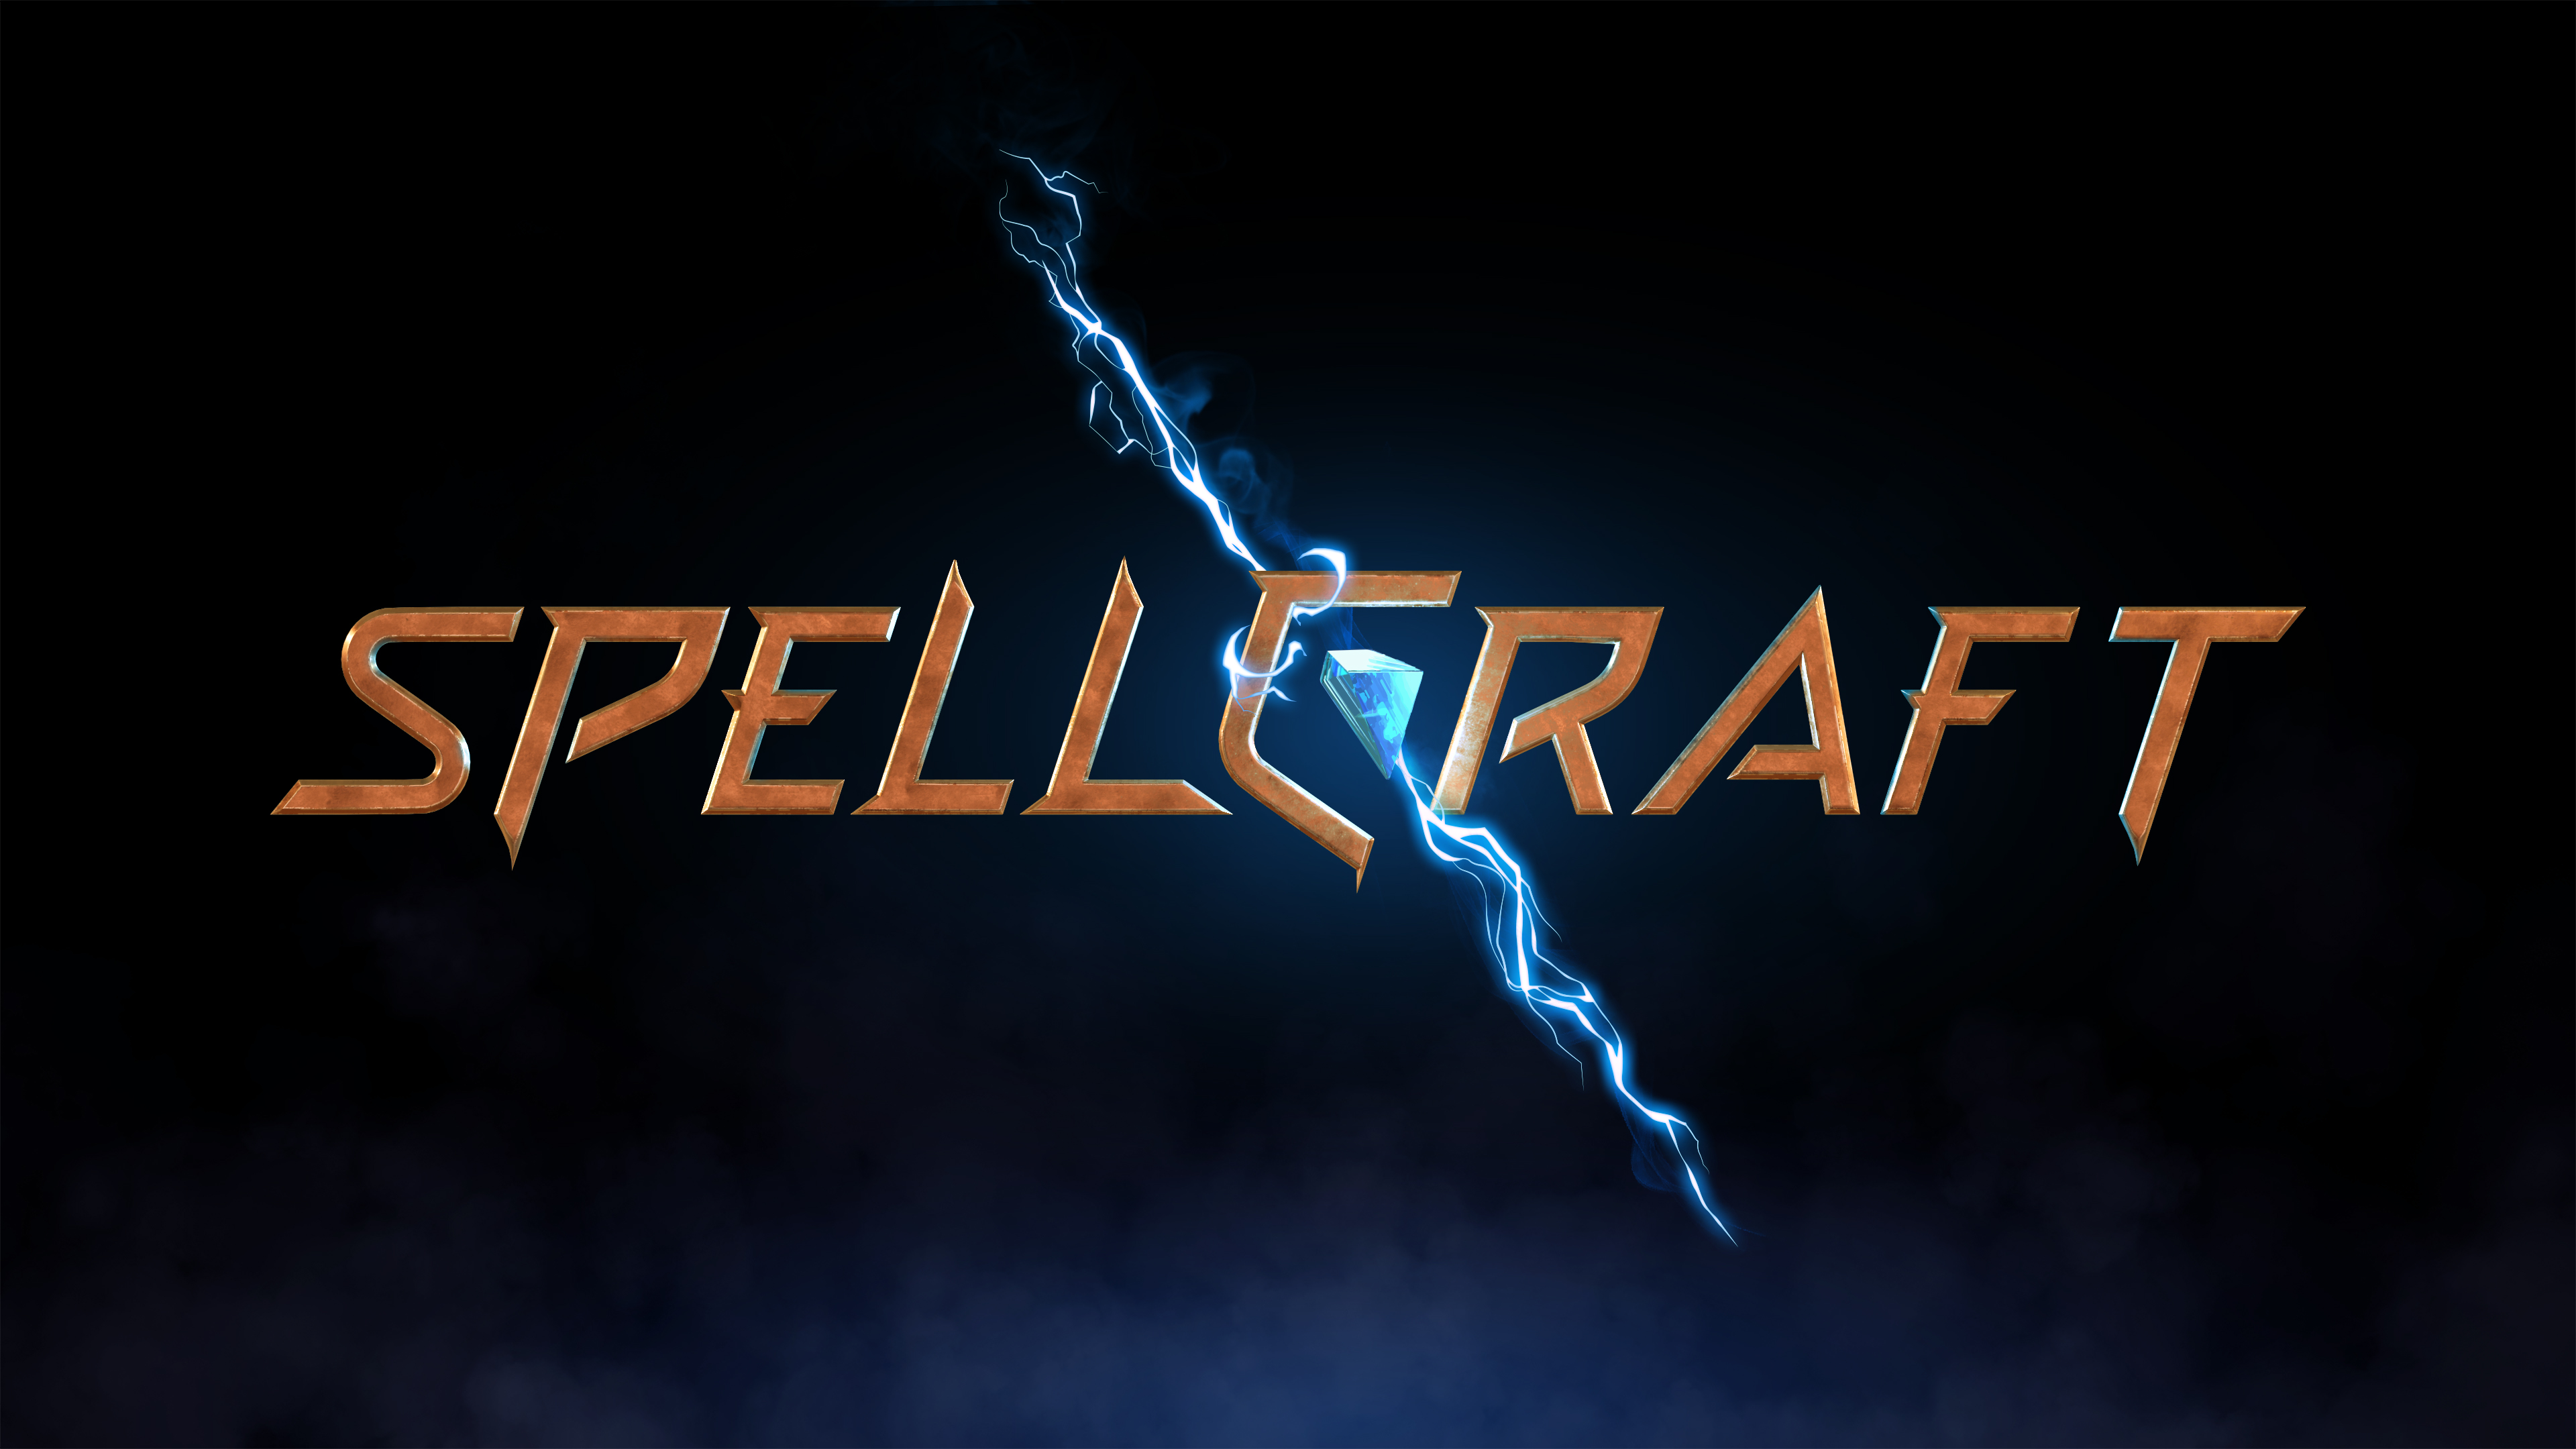 Spellcraft, the genre-defining real-time combat game, is launching a public alpha on April 6